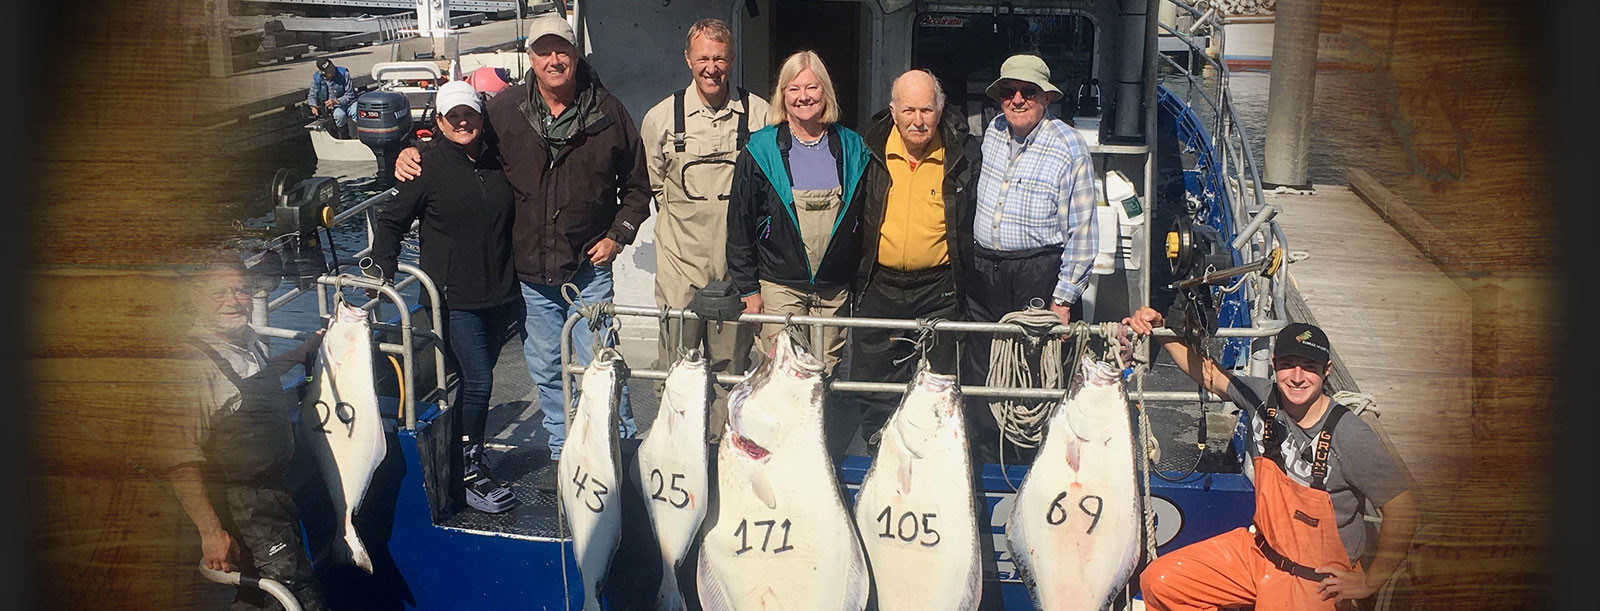 A group of fishermen display their halibut catch